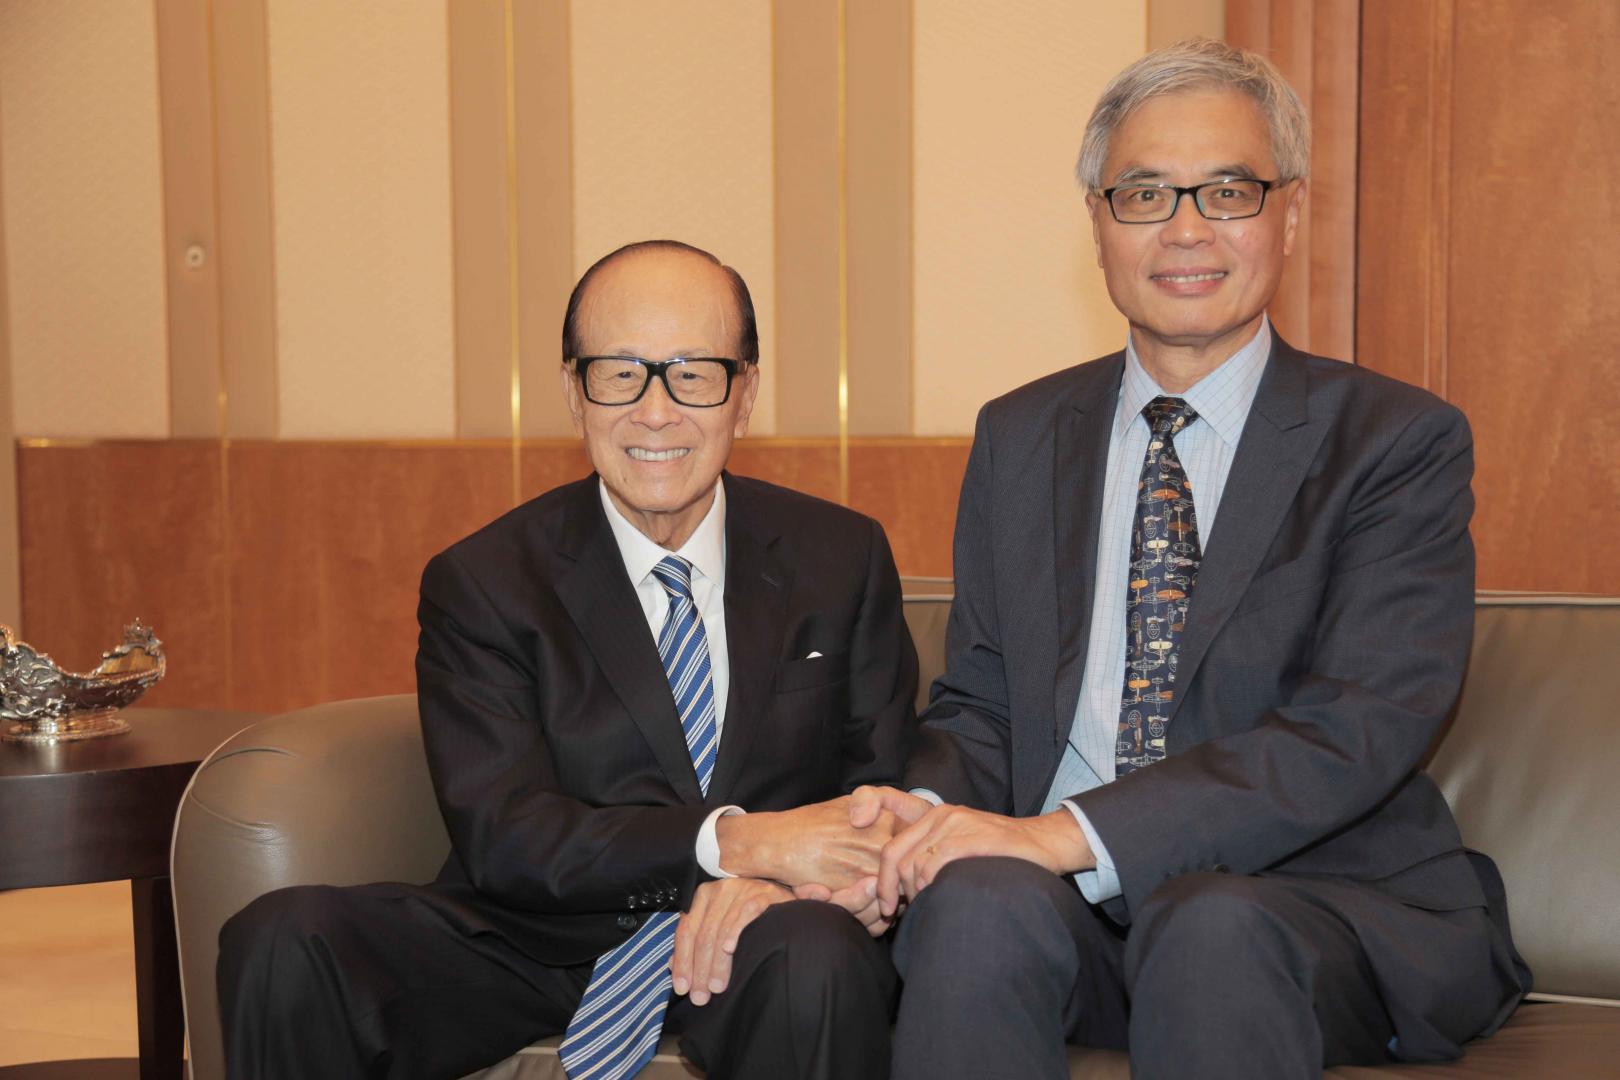 Mr. LI Ka-Shing, Chairman of Li Ka Shing Foundation (left) and Prof. Wei SHYY, President of HKUST, witness the signing of a Memorandum of Cooperation. They agree that promoting the development of synthetic biology will bring about more opportunities.